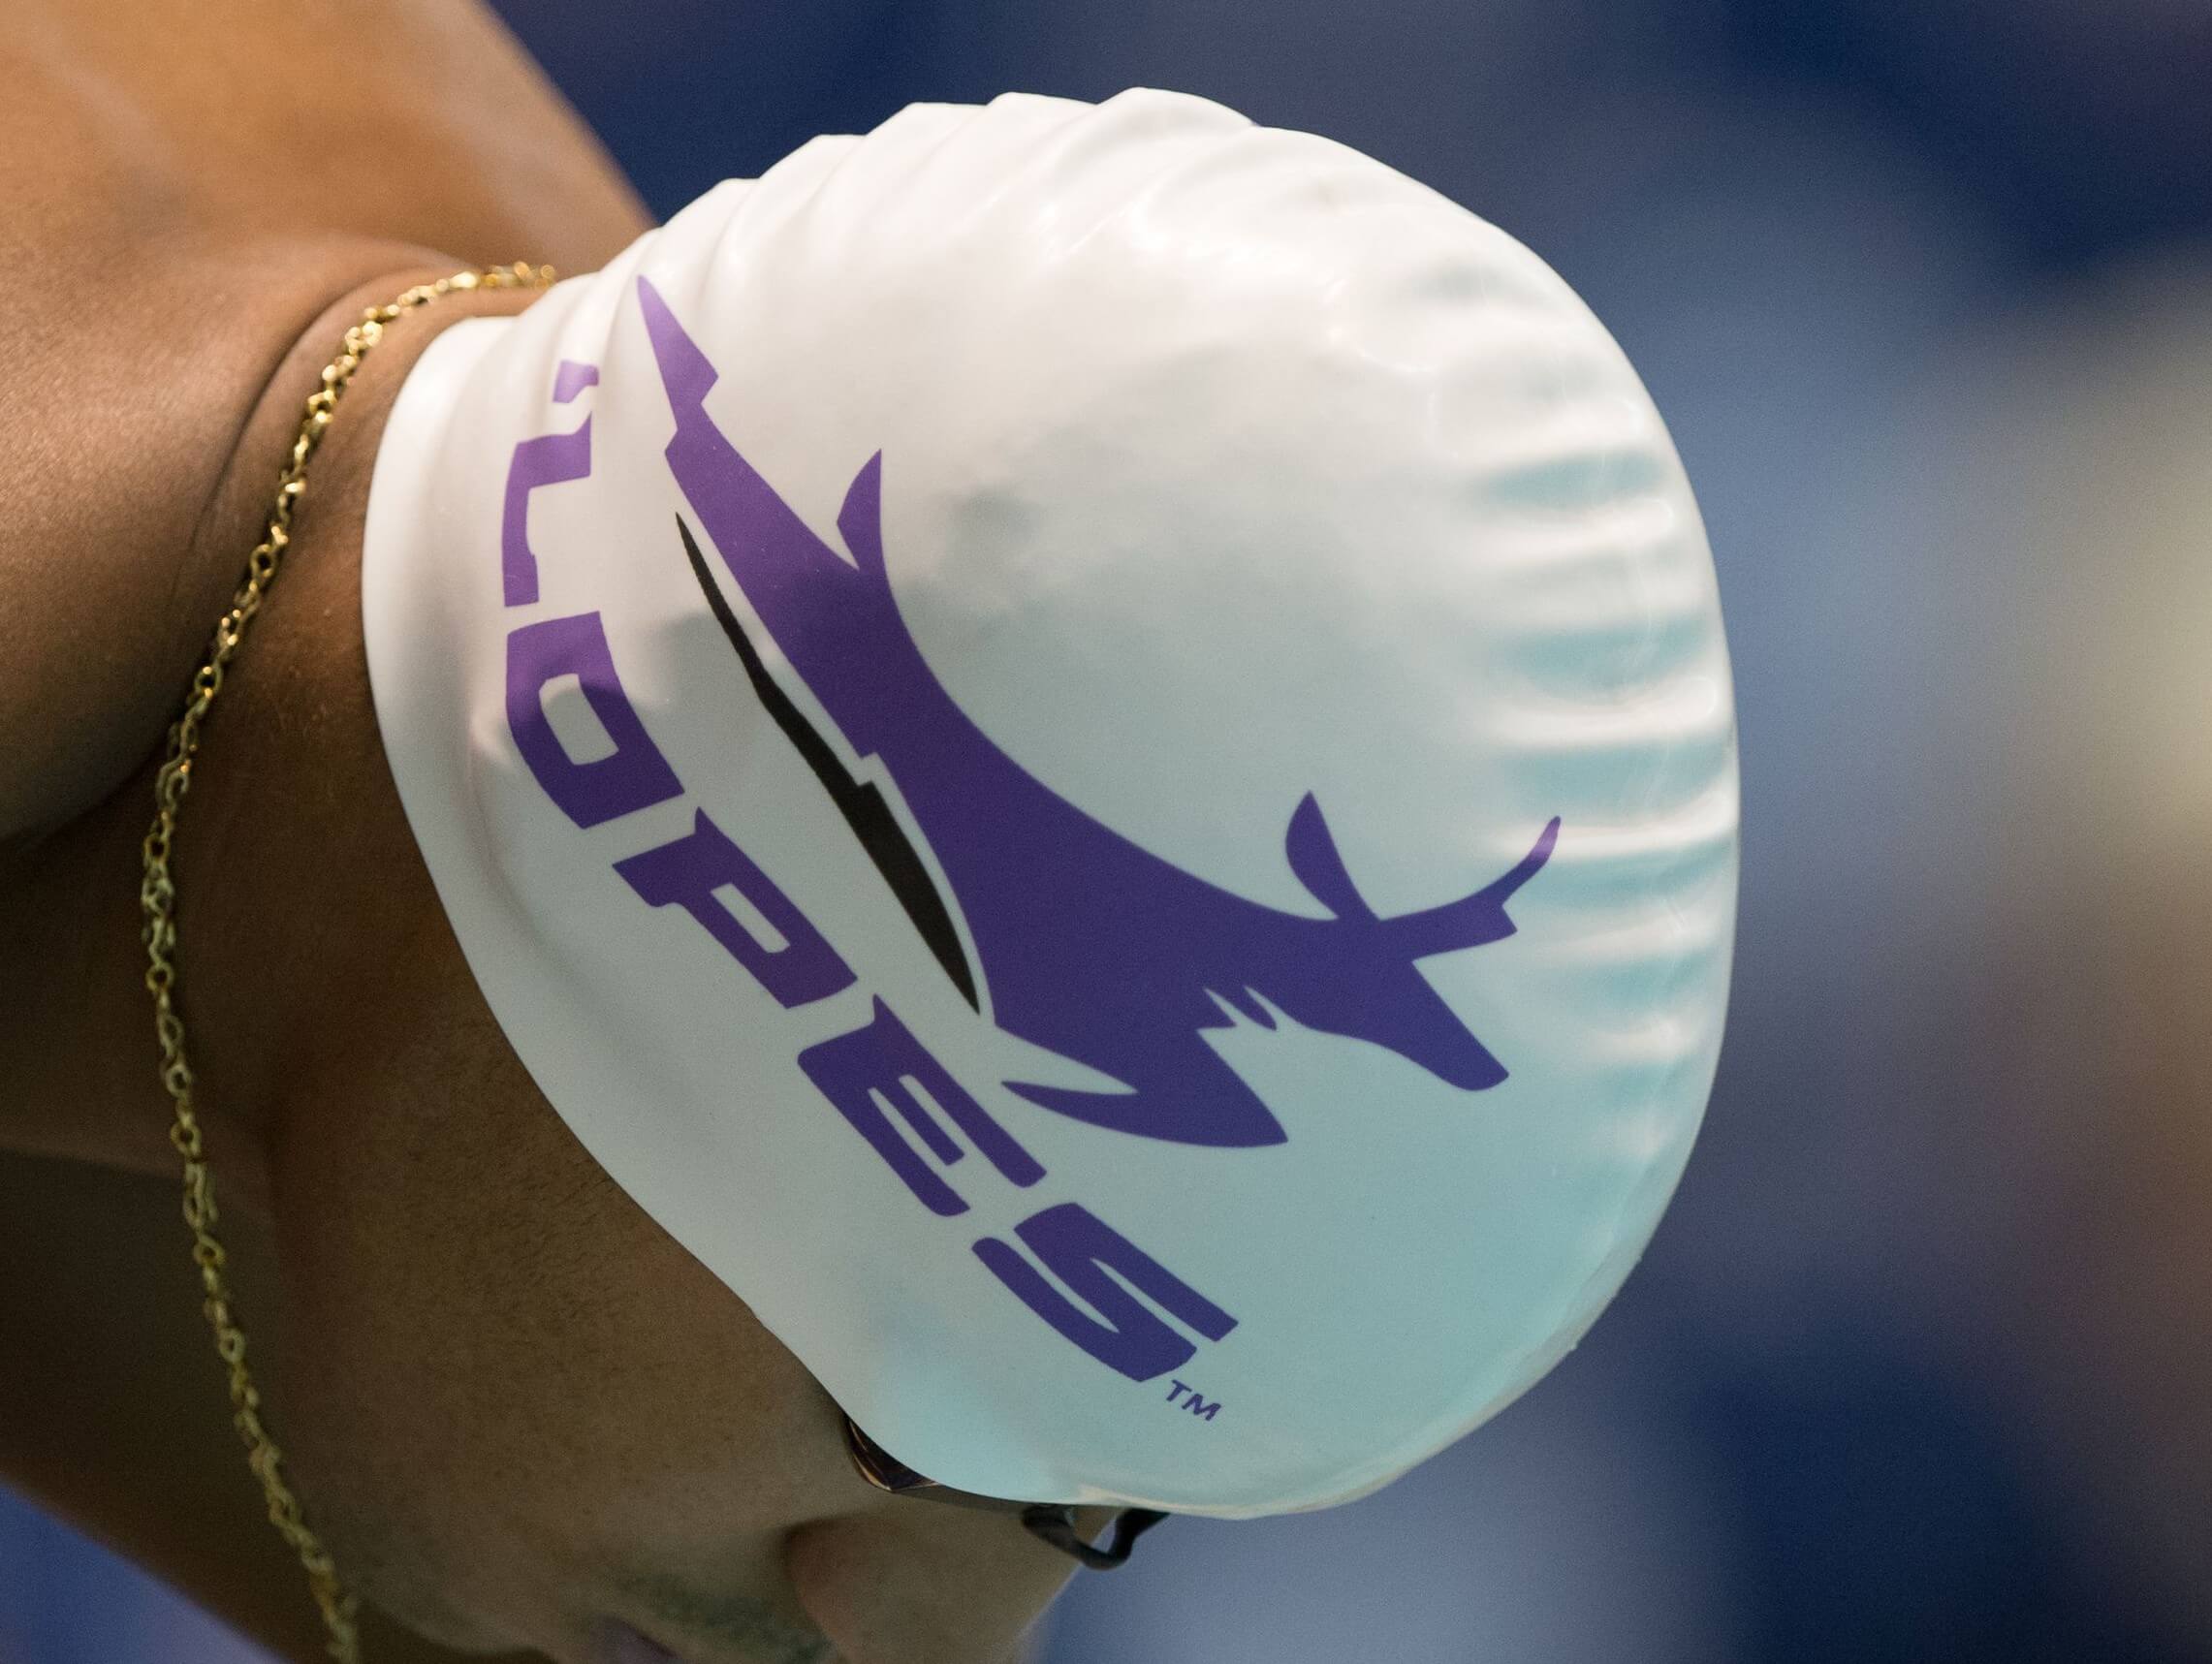 Knoxville, TN - December 7, 2013: Grand Canyon University Lopes Swimmer during the 2013 AT&T Swimming Winter National Championships on December 7, 2013 in Knoxville, Tennessee at the Allan Jones Aquatic Center. Photo By Matthew DeMaria/Tennessee Athletics